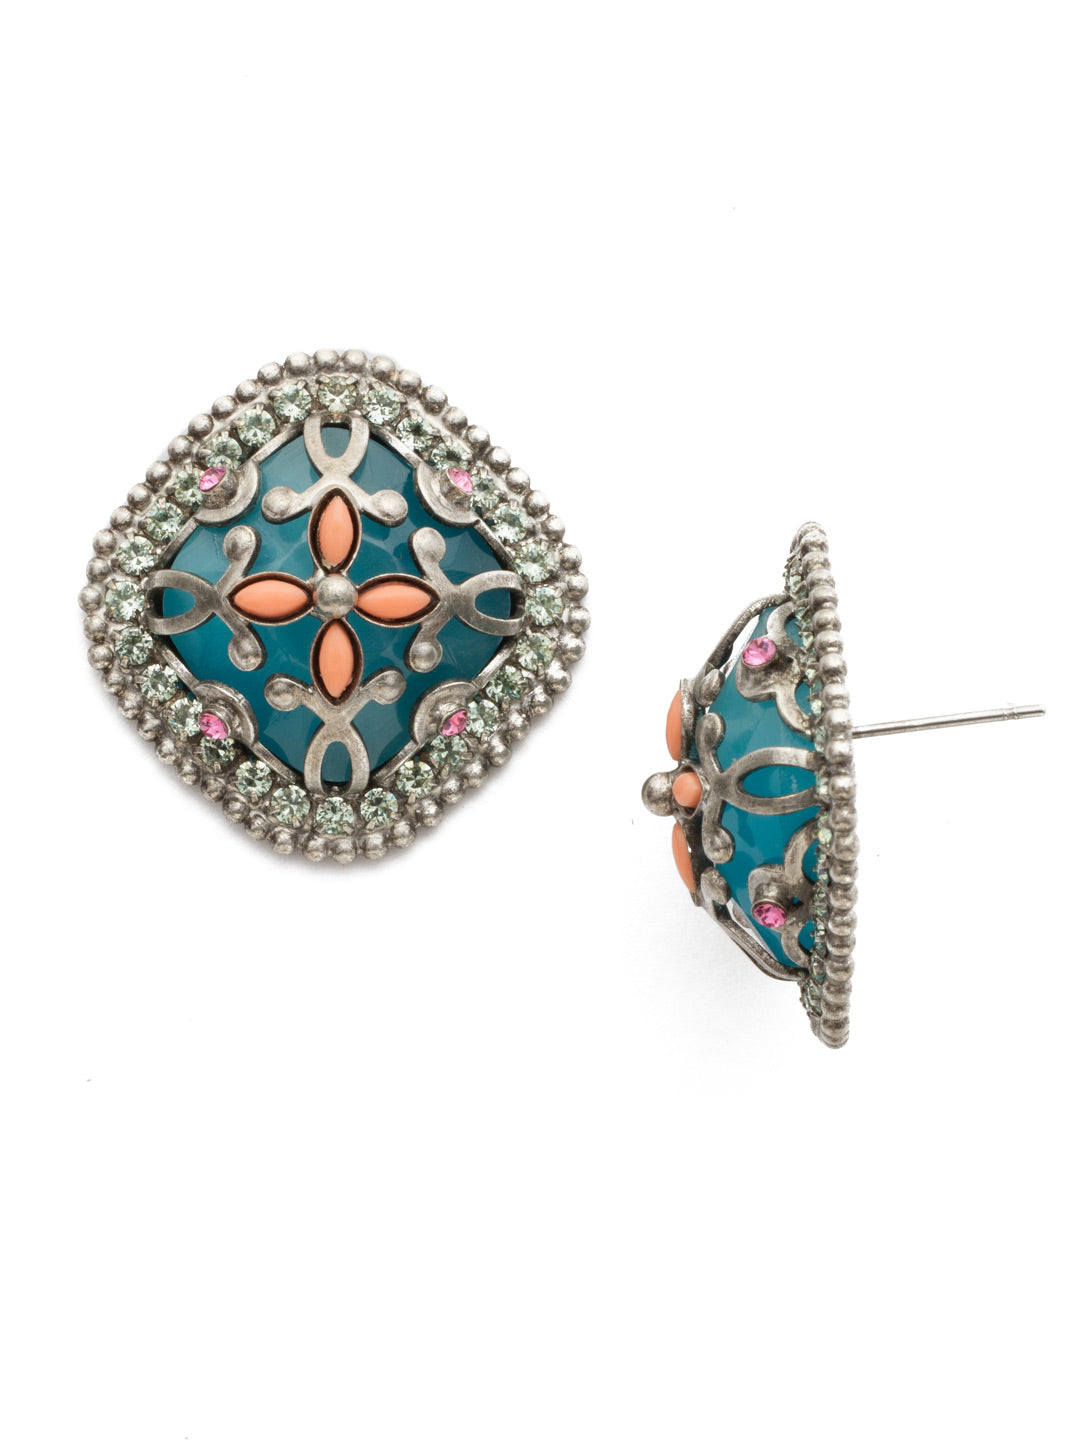 Freesia Earring - EDS27ASVH - Classic Sorrelli style abounds in the intricate styling of this earring. Detailed metalwork and inlaid semi-precious stones make this earring a standout.